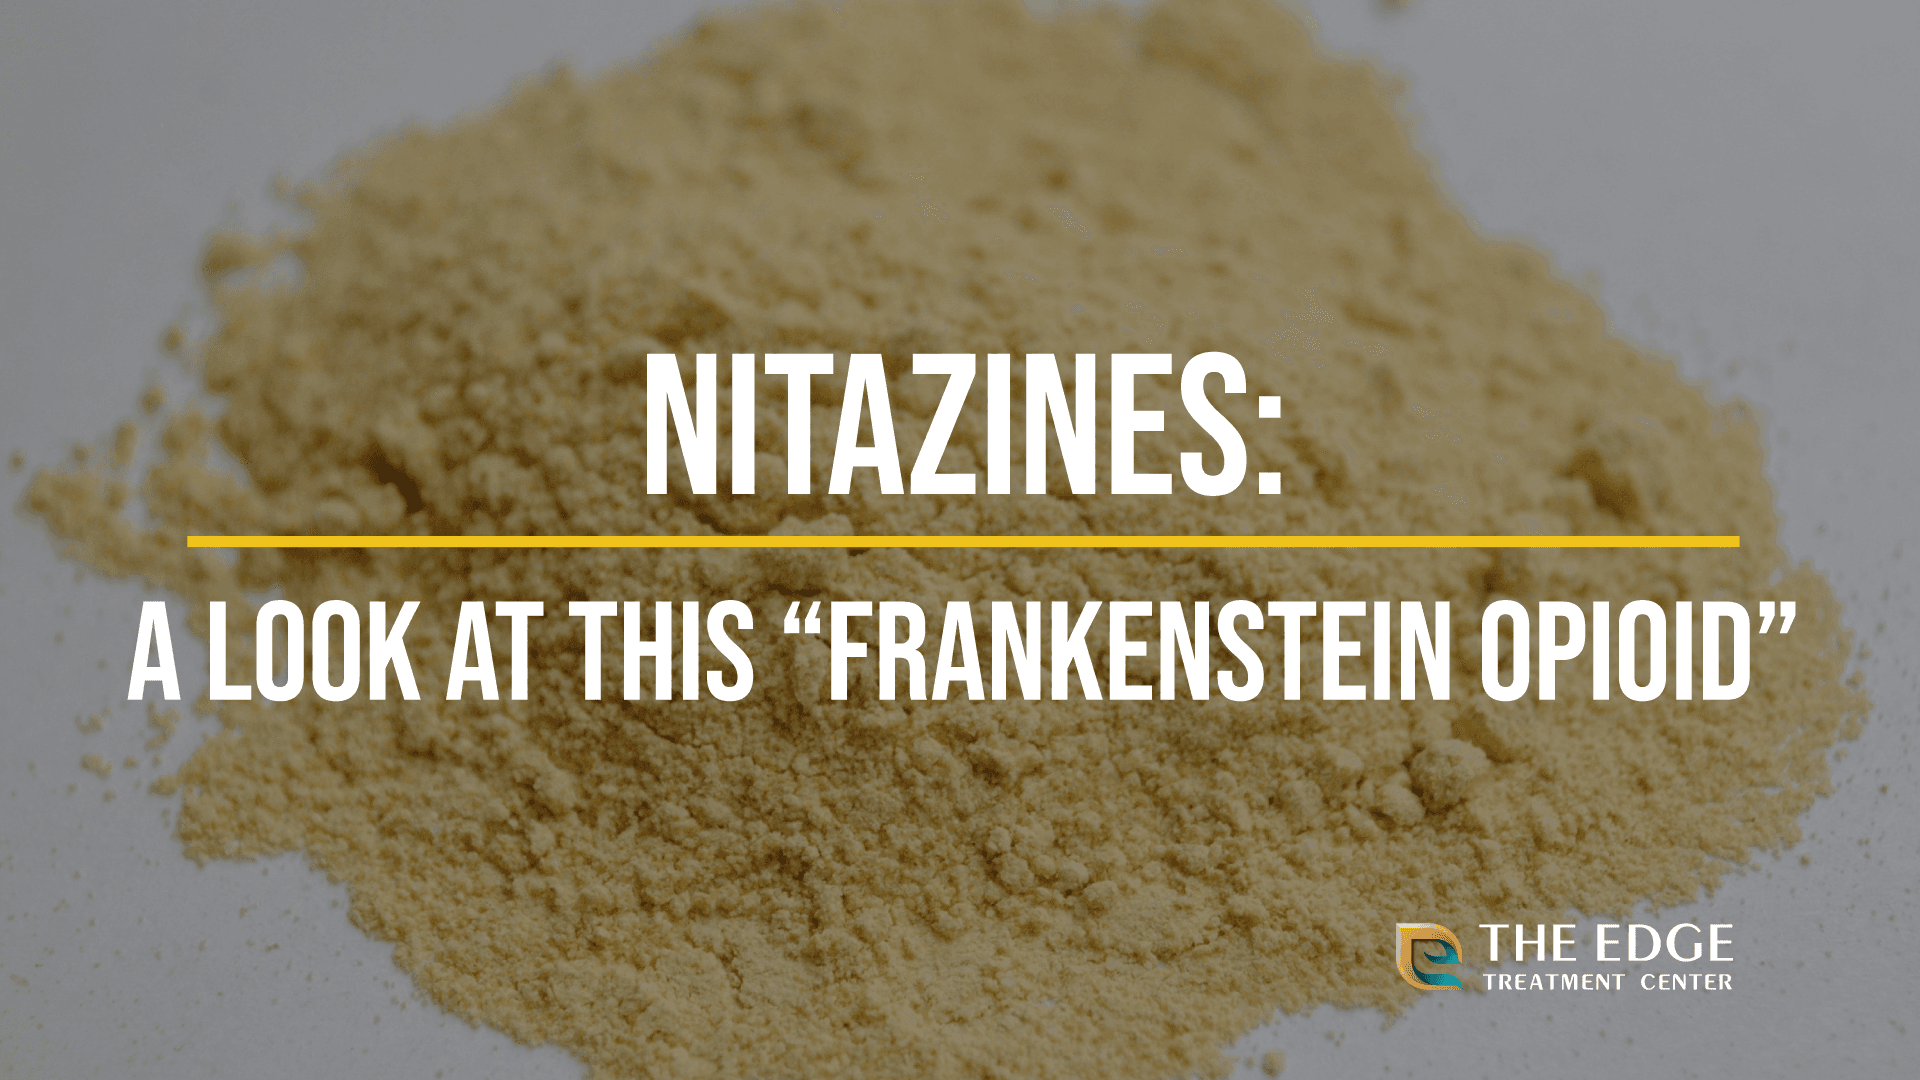 Nitazine: Facts, History, and More